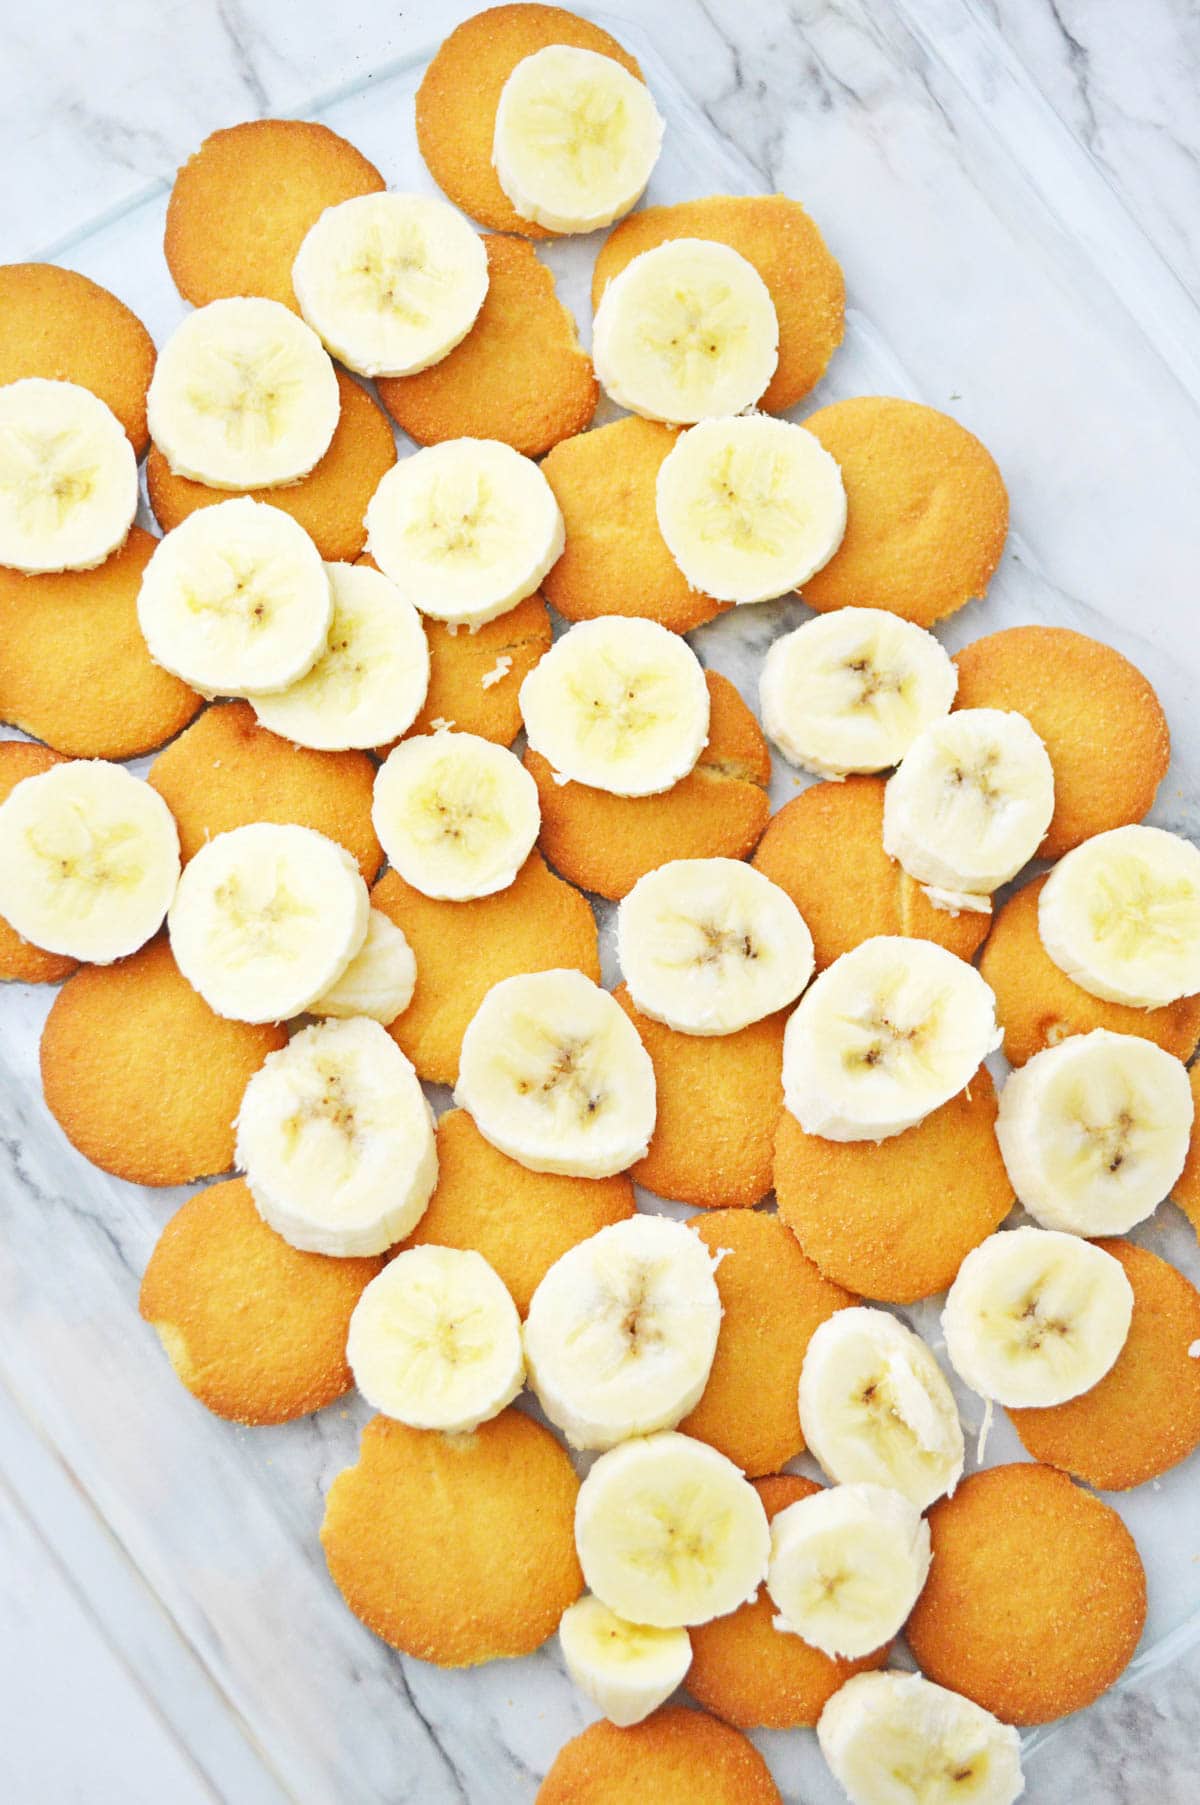 Banana slices on Nilla Wafer cookies in glass pan